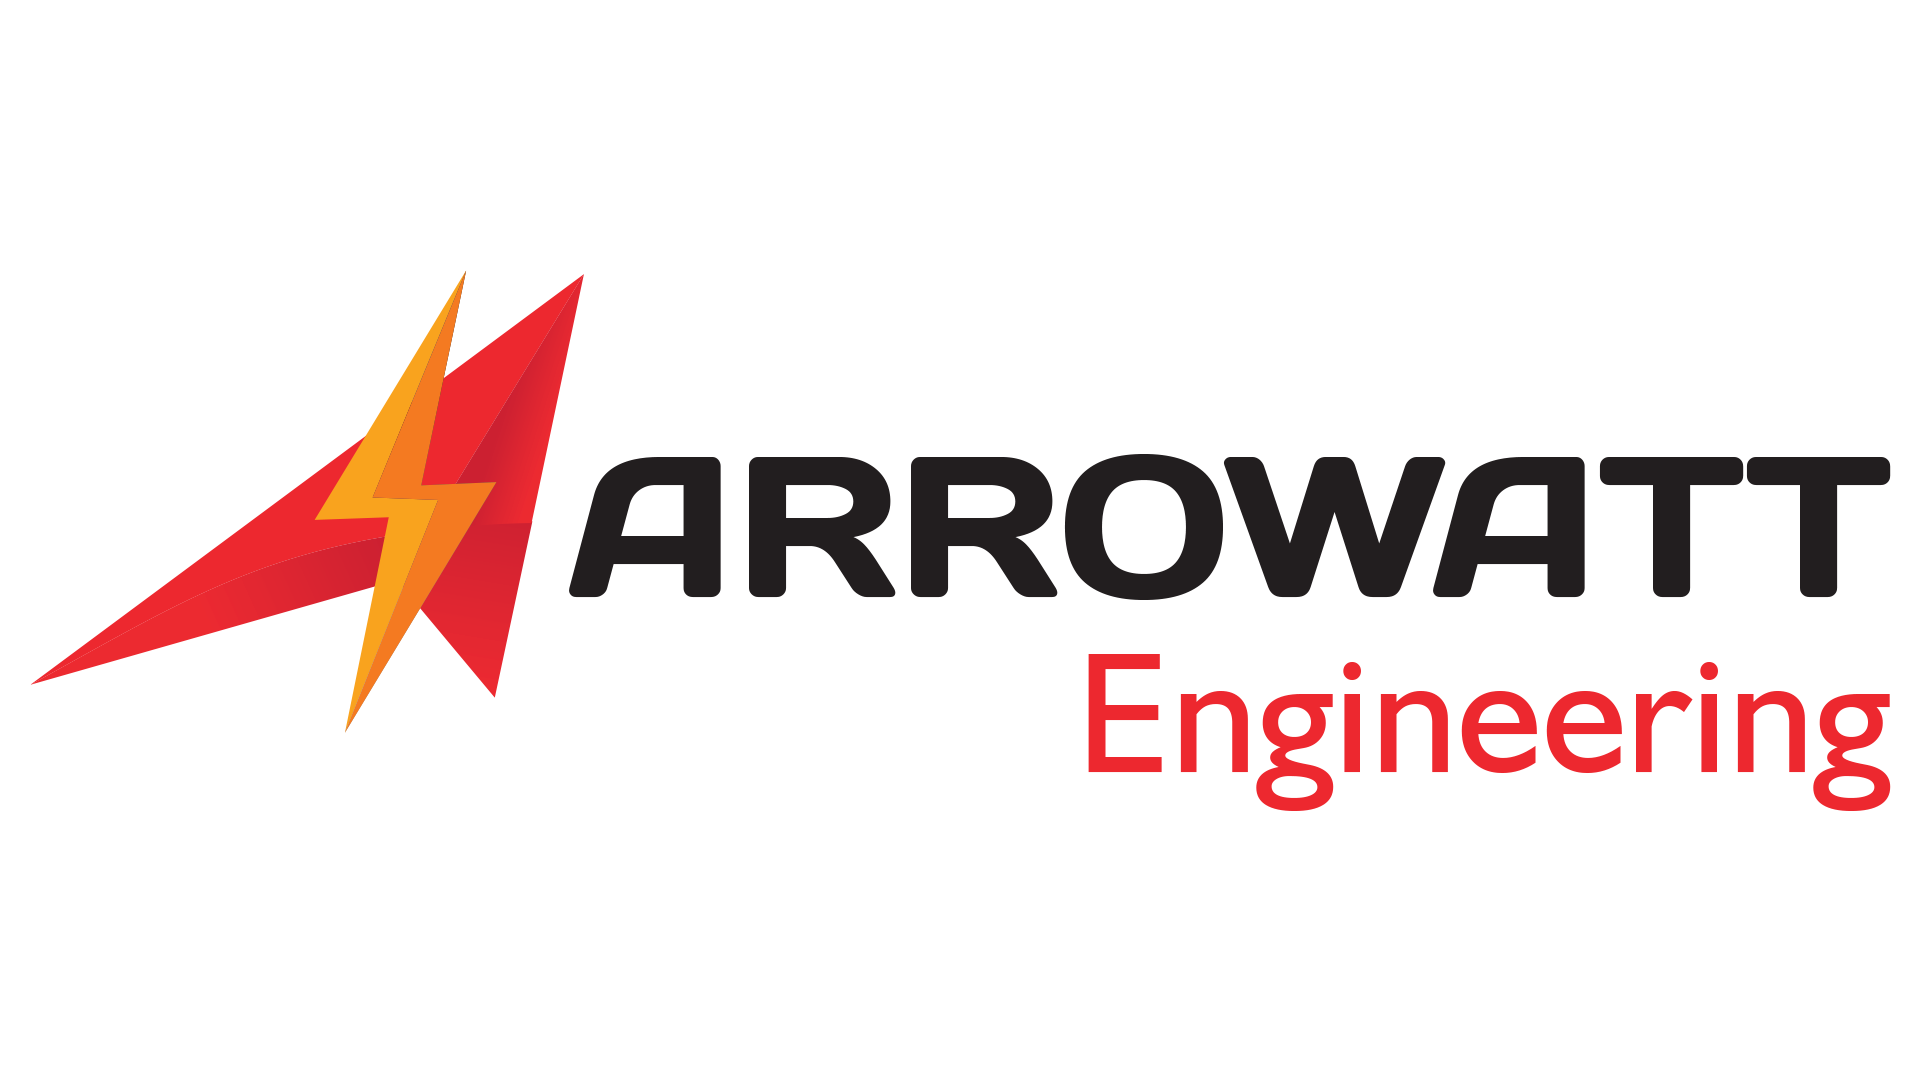 Arrowatt Engineering | Erection upto 33 kV GIS | Testing & Commissioning of all Electrical Switch Gears & GIS